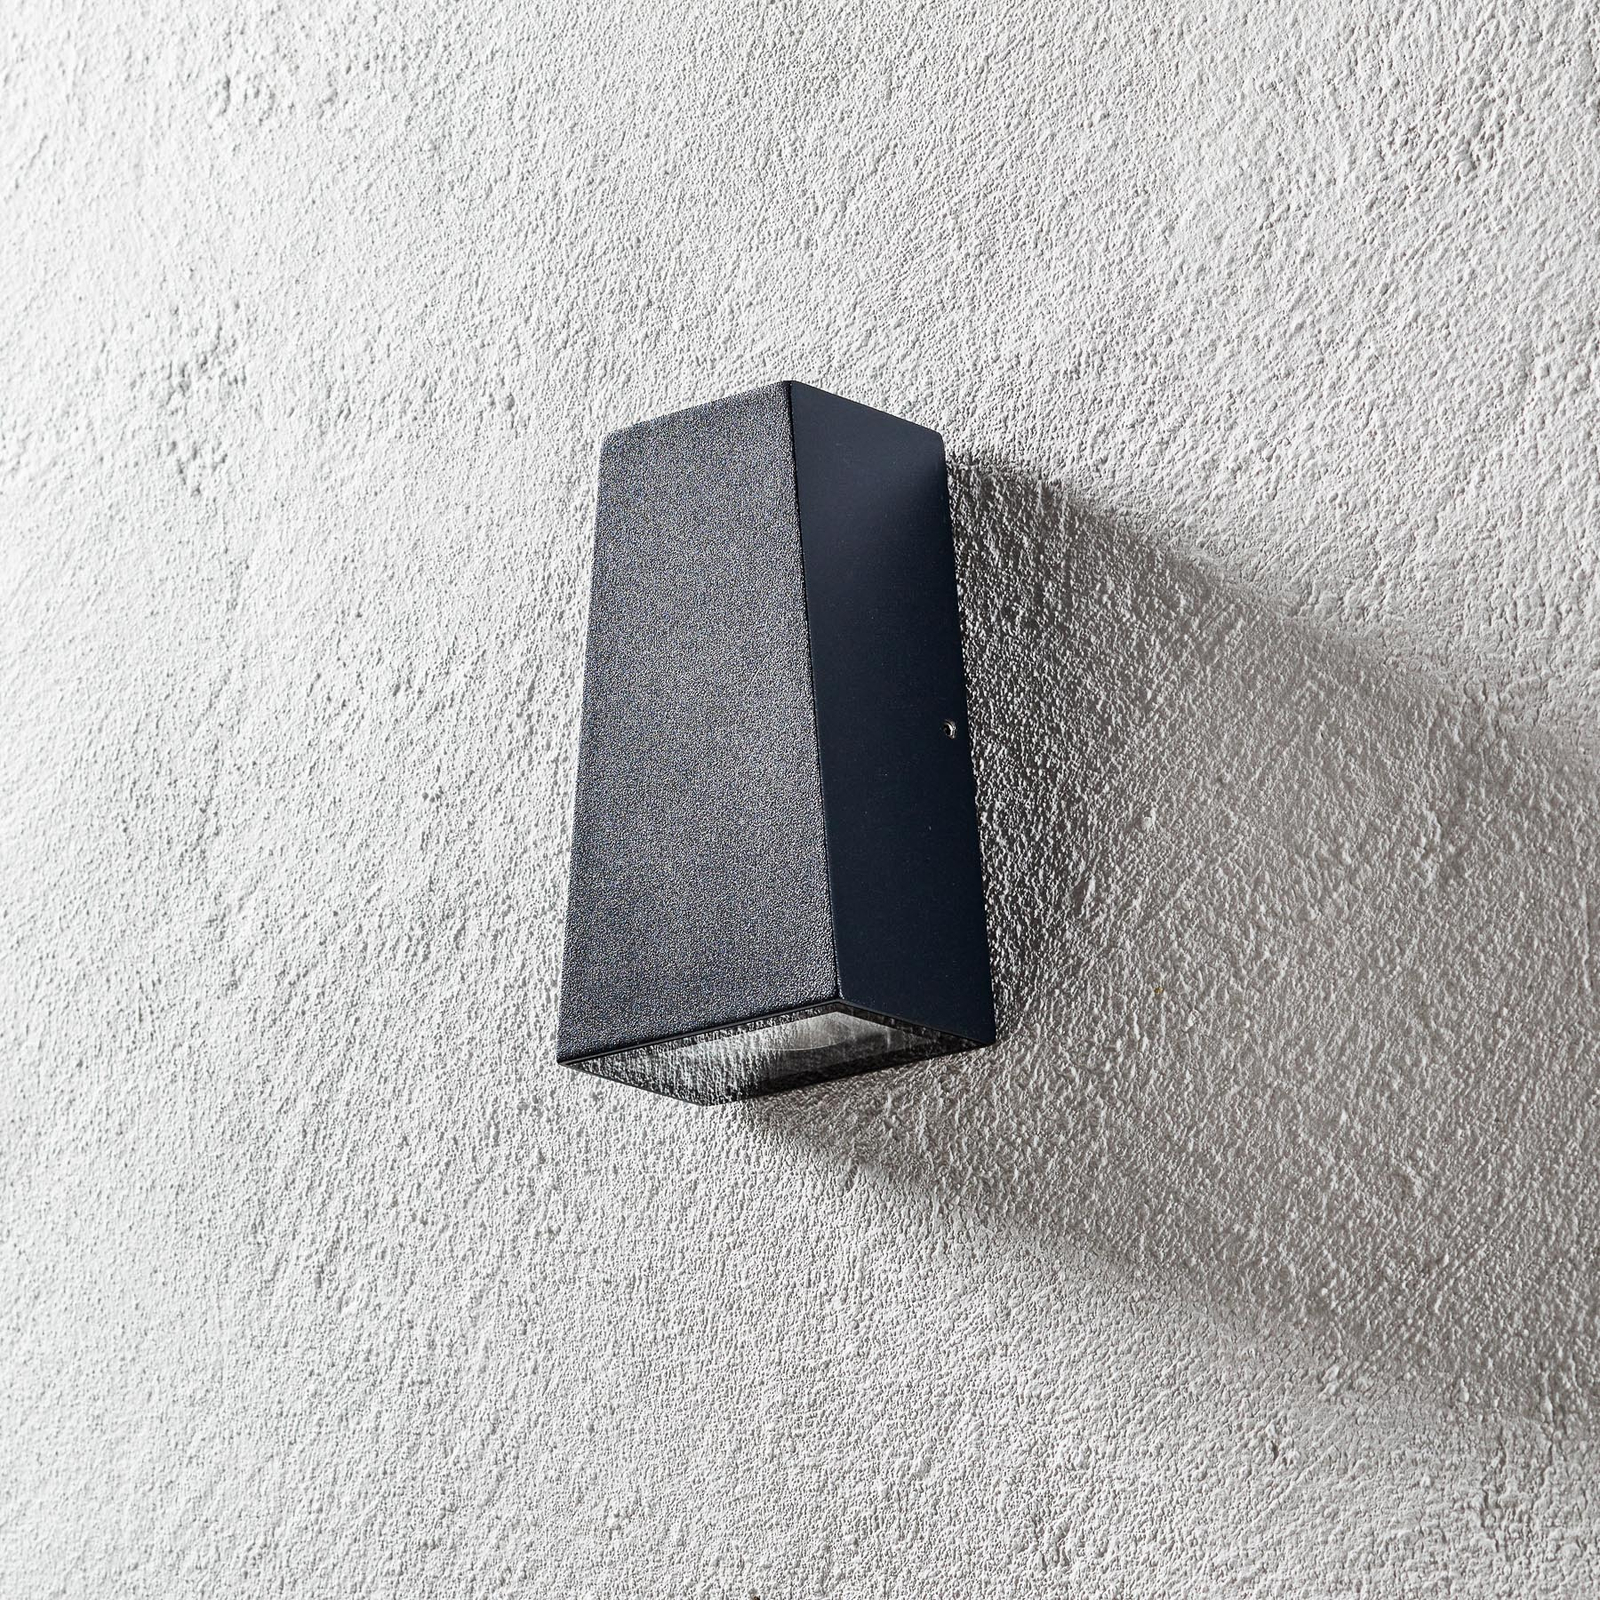 THORNeco Holly Cone Square Up/Down LED-Wandleuchte